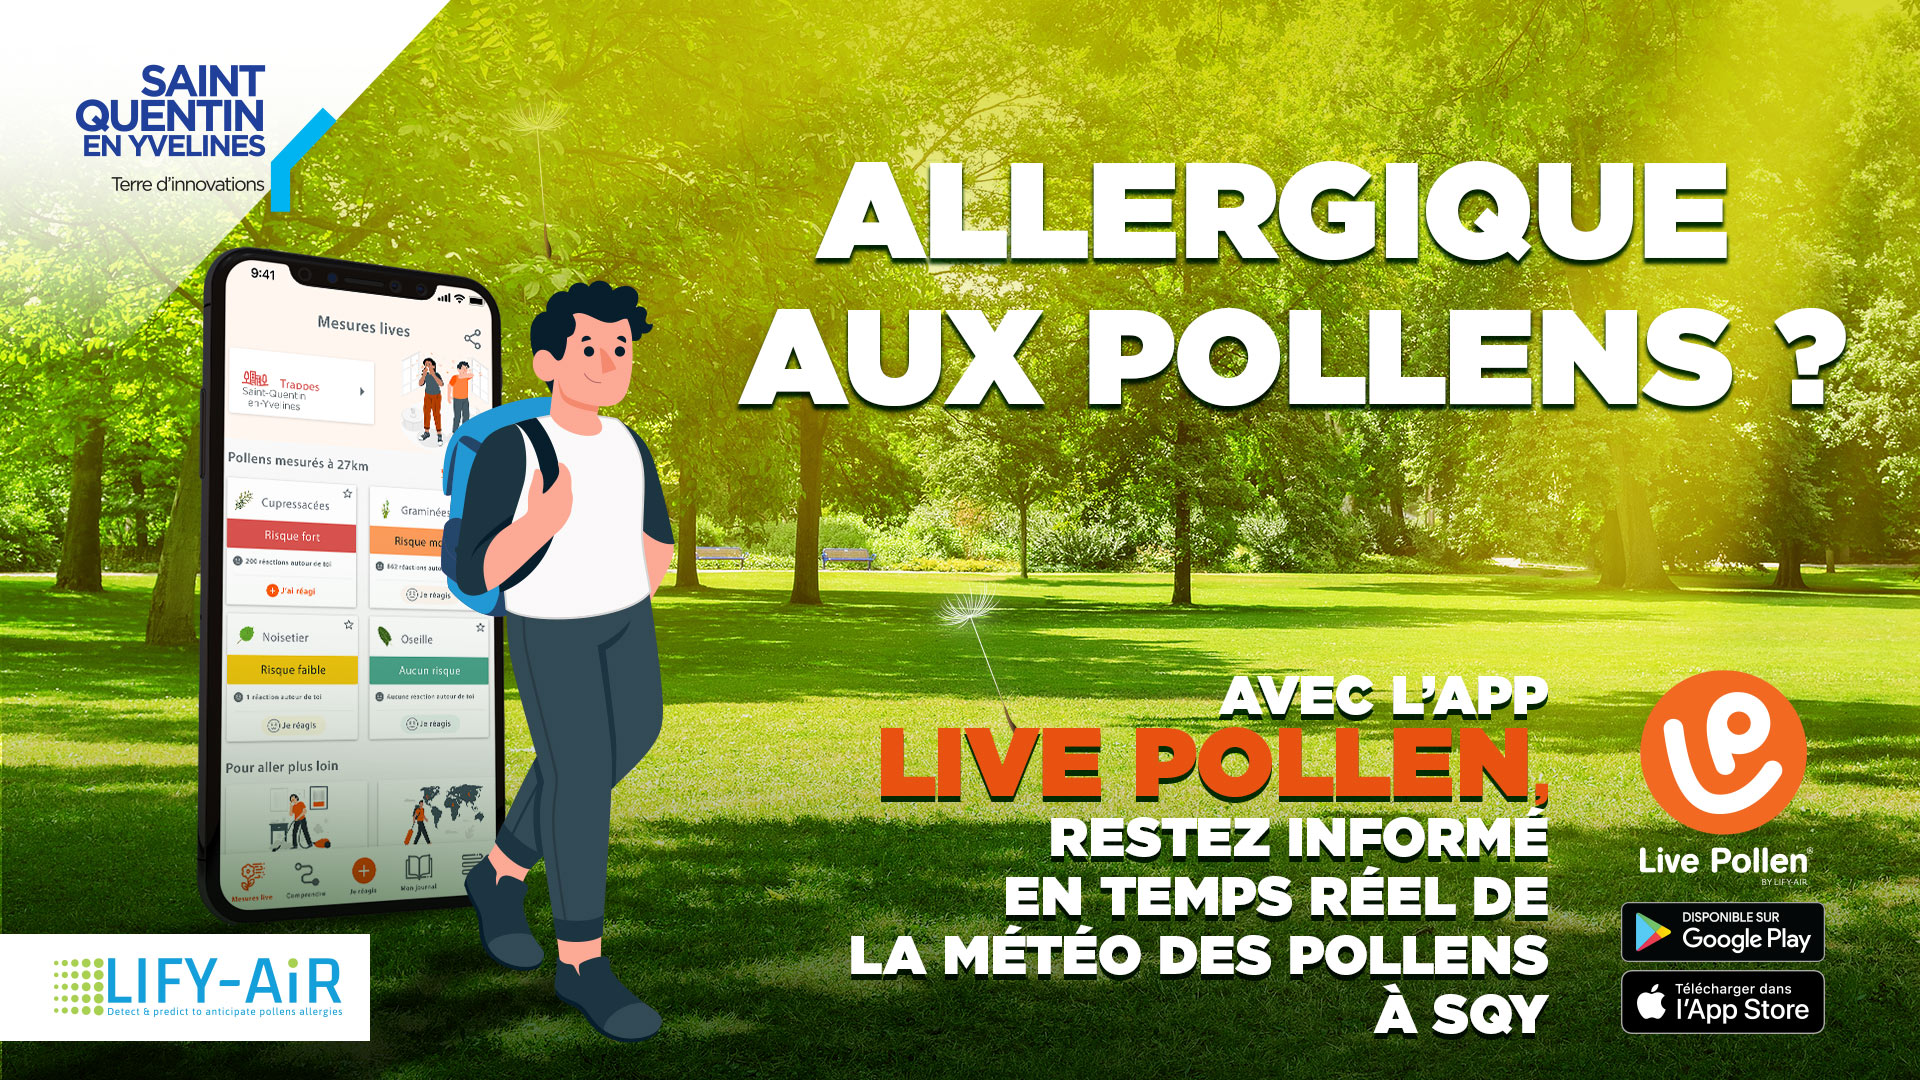 Keep up to date with the weather in pollen mode with the Live Pollen app – Saint-Quentin-en-Yvelines – Saint-Quentin-en-Yvelines